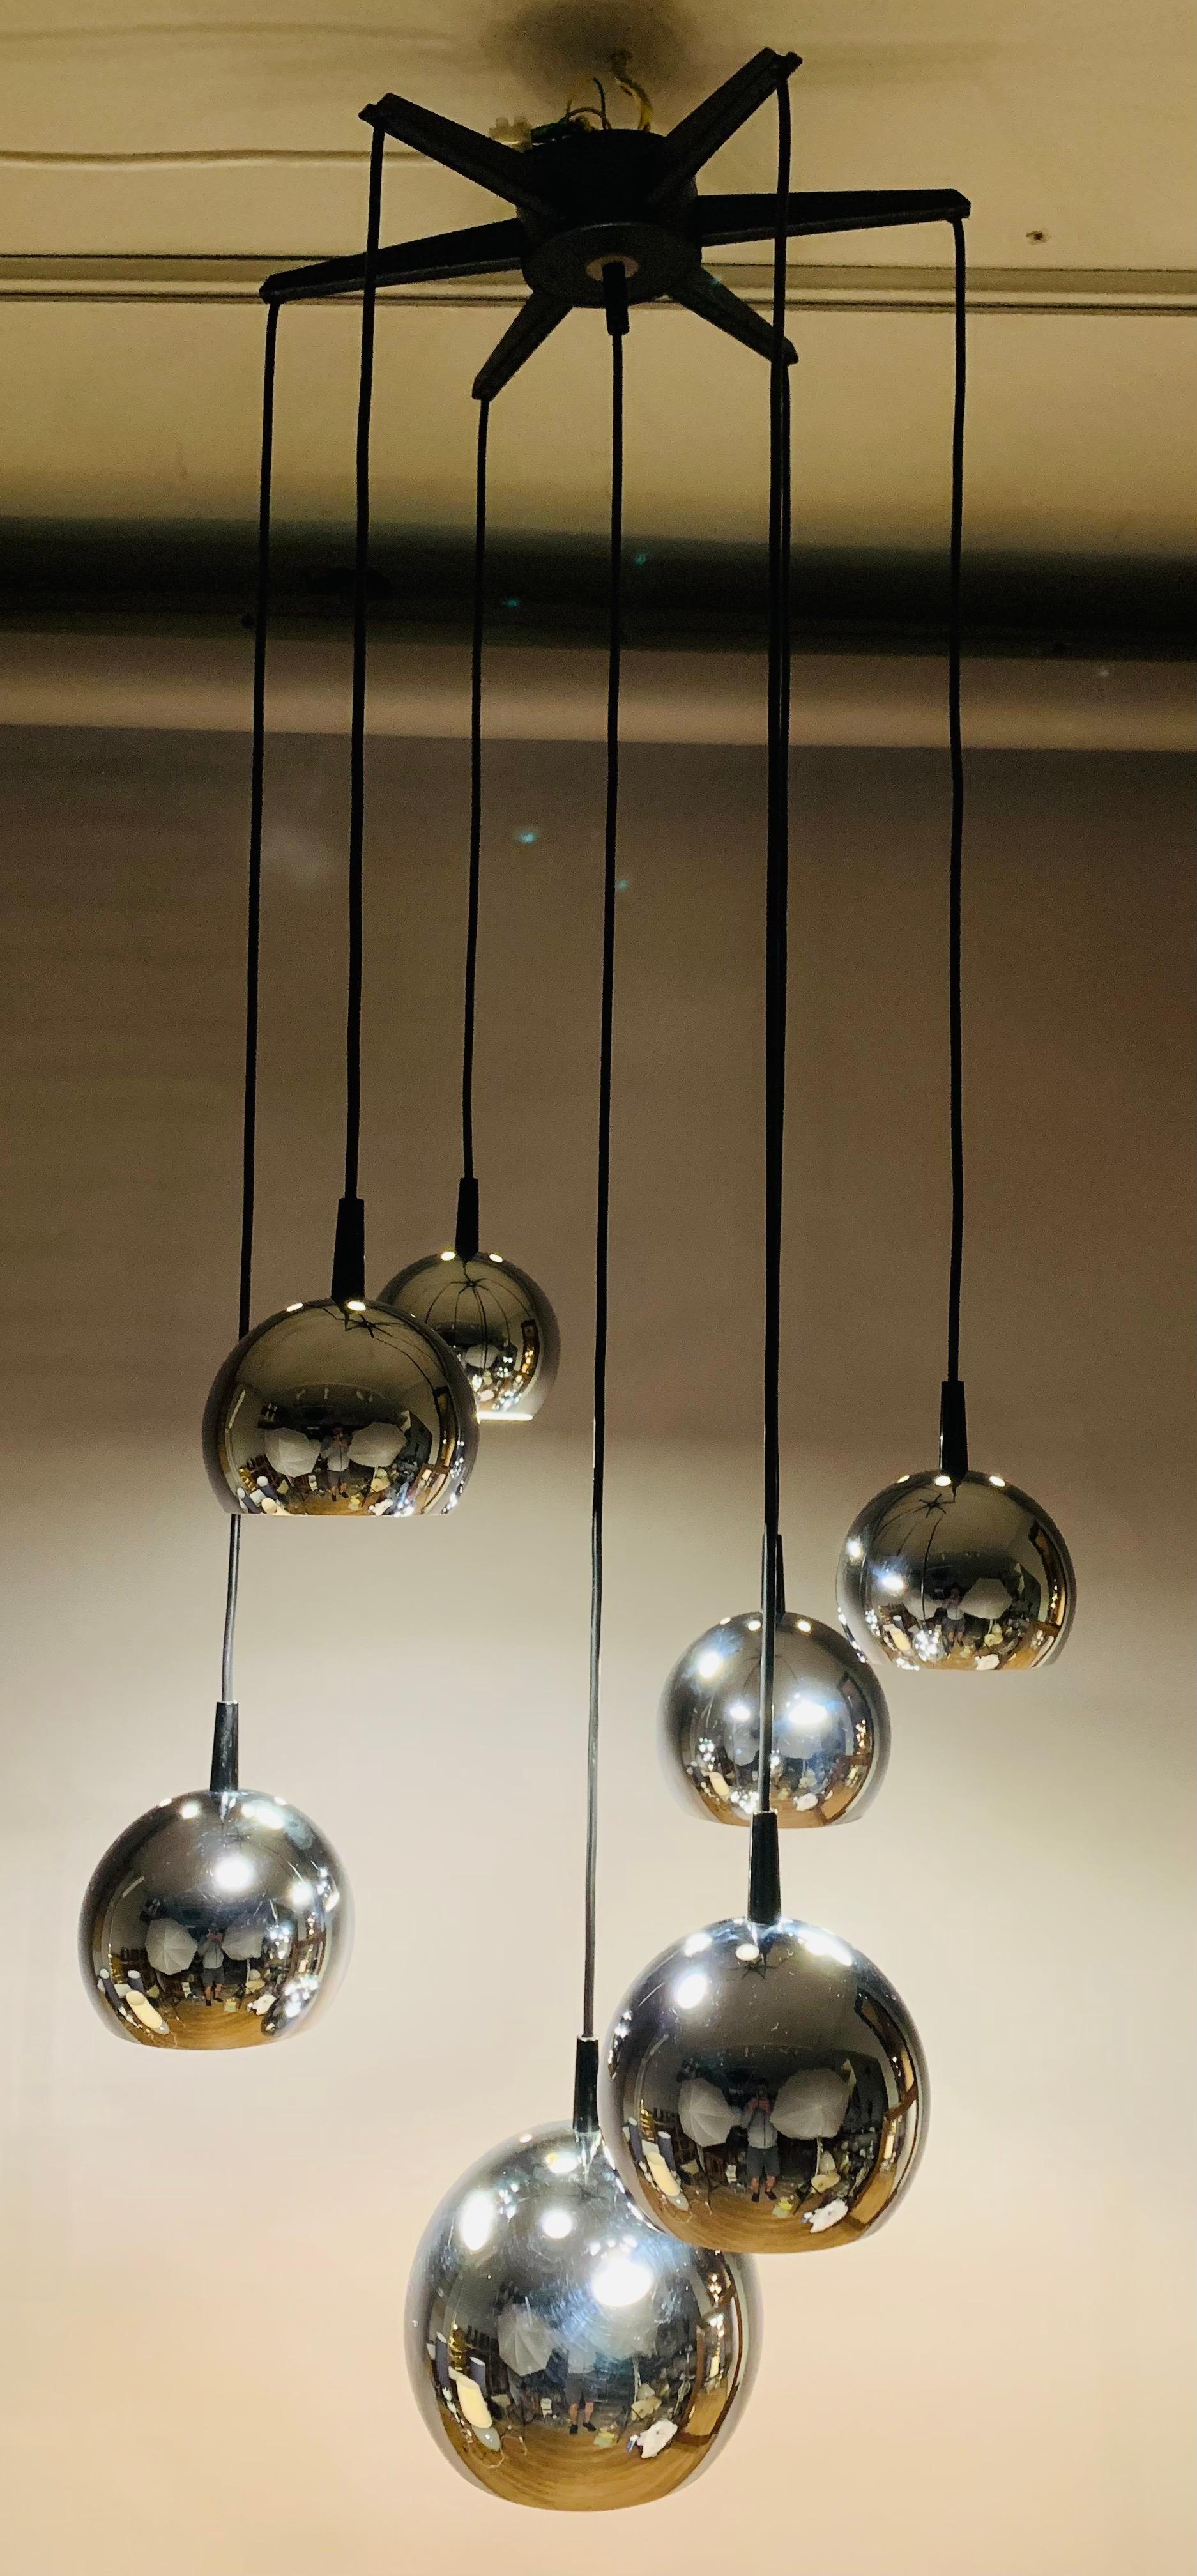 1970s, German, space-age, hanging ceiling light with seven cascading chrome globes each suspended from a black wire flex and a star ceiling canopy. The light has three varying sizes of globe - 3 small, 3 medium nd one large one at the very bottom.